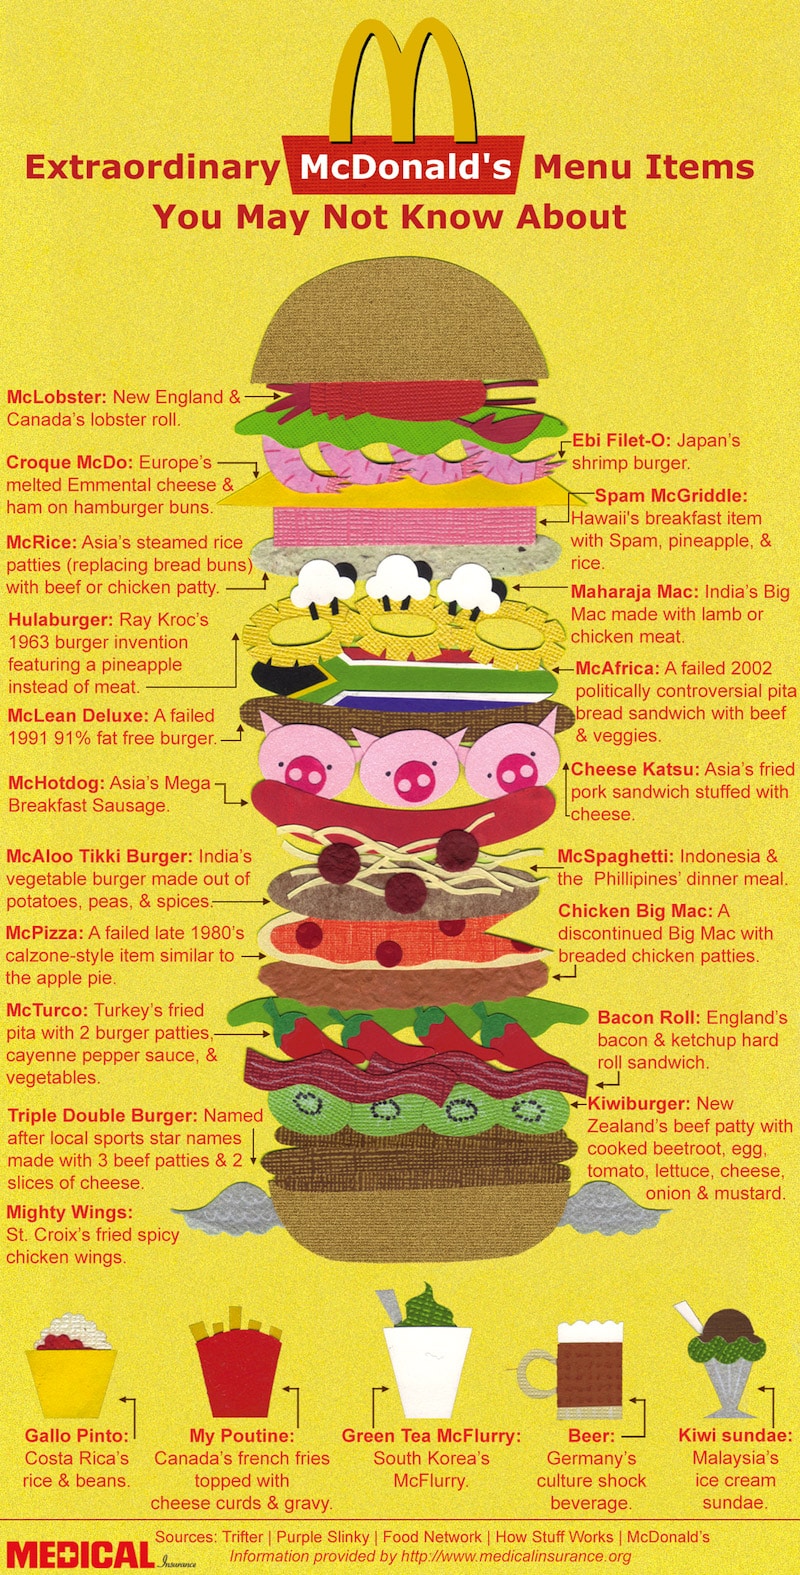 McDonald’s Menu Items You Didn’t Know About [Infographic]